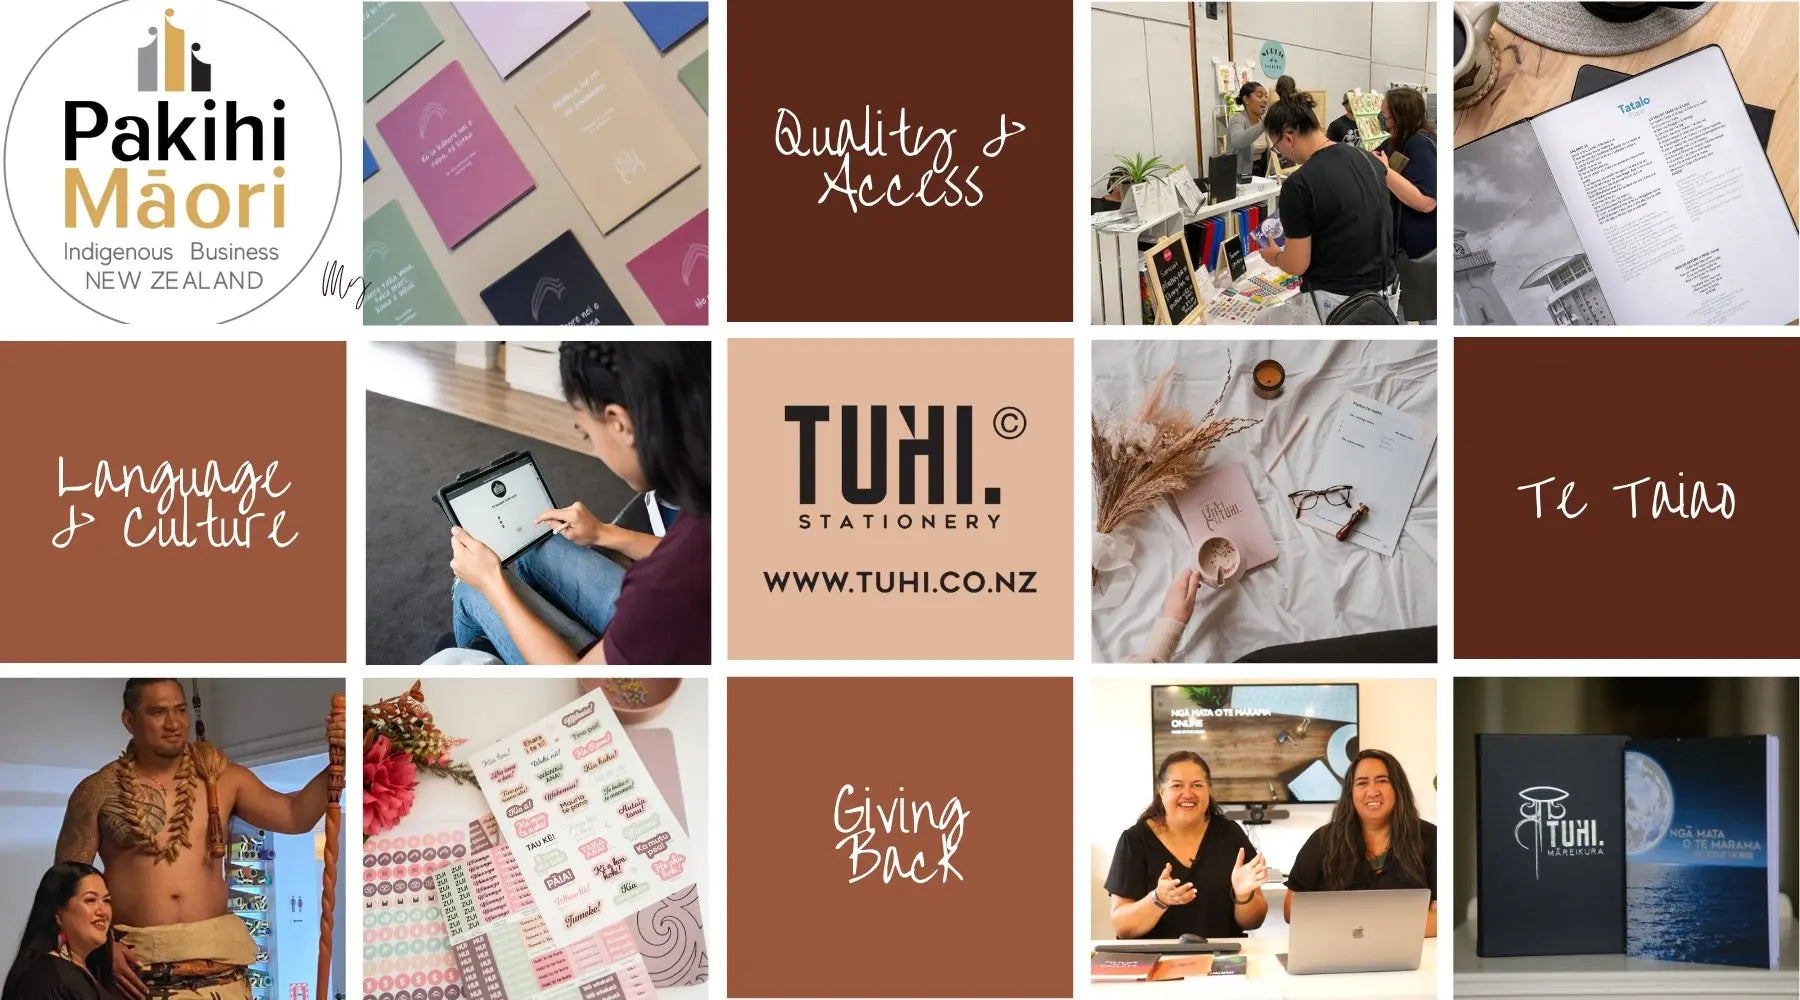 Challenges-of-putting-your-values-into-practice Tuhi Stationery Ltd